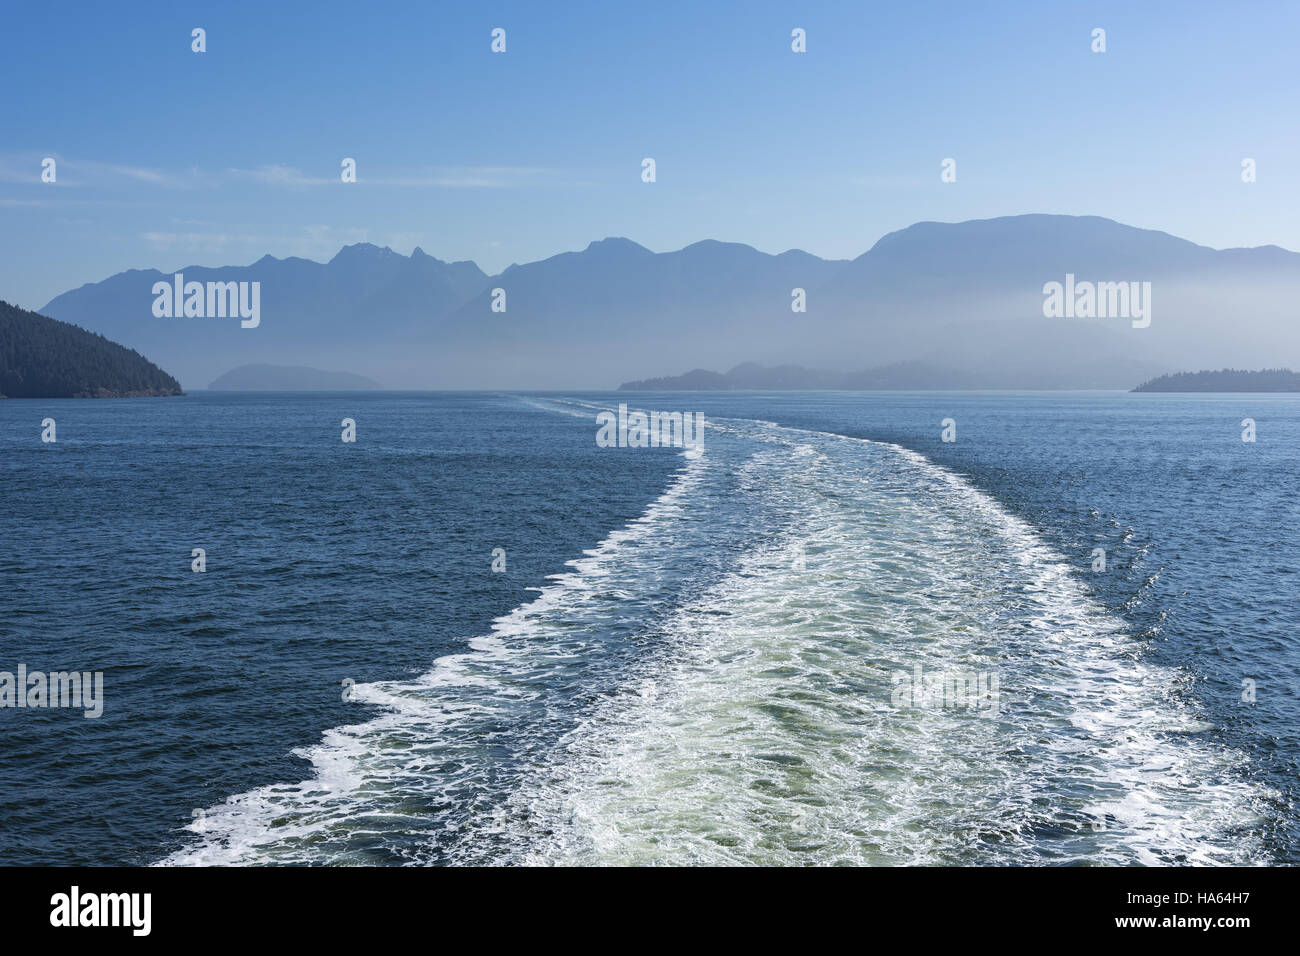 Wake of a Ferry near Vancouver Island with mountains in the background Stock Photo